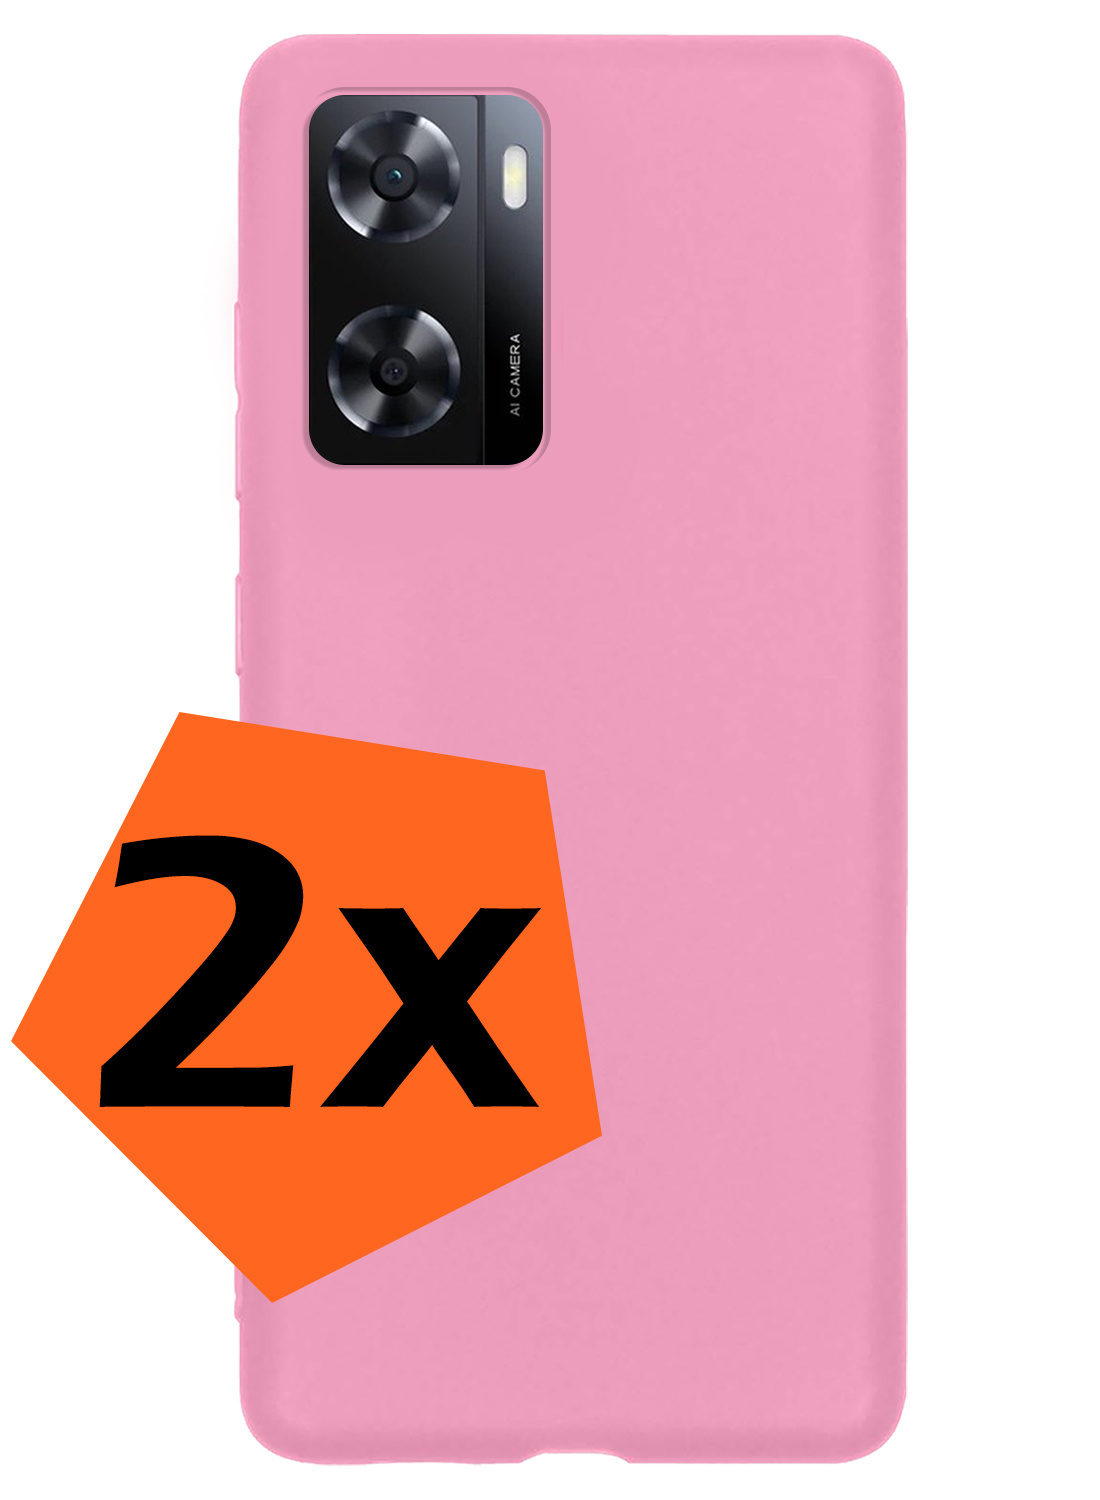 Nomfy OPPO A57s Hoesje Siliconen Case Back Cover - OPPO A57s Hoes Cover Silicone - Licht Roze - 2X